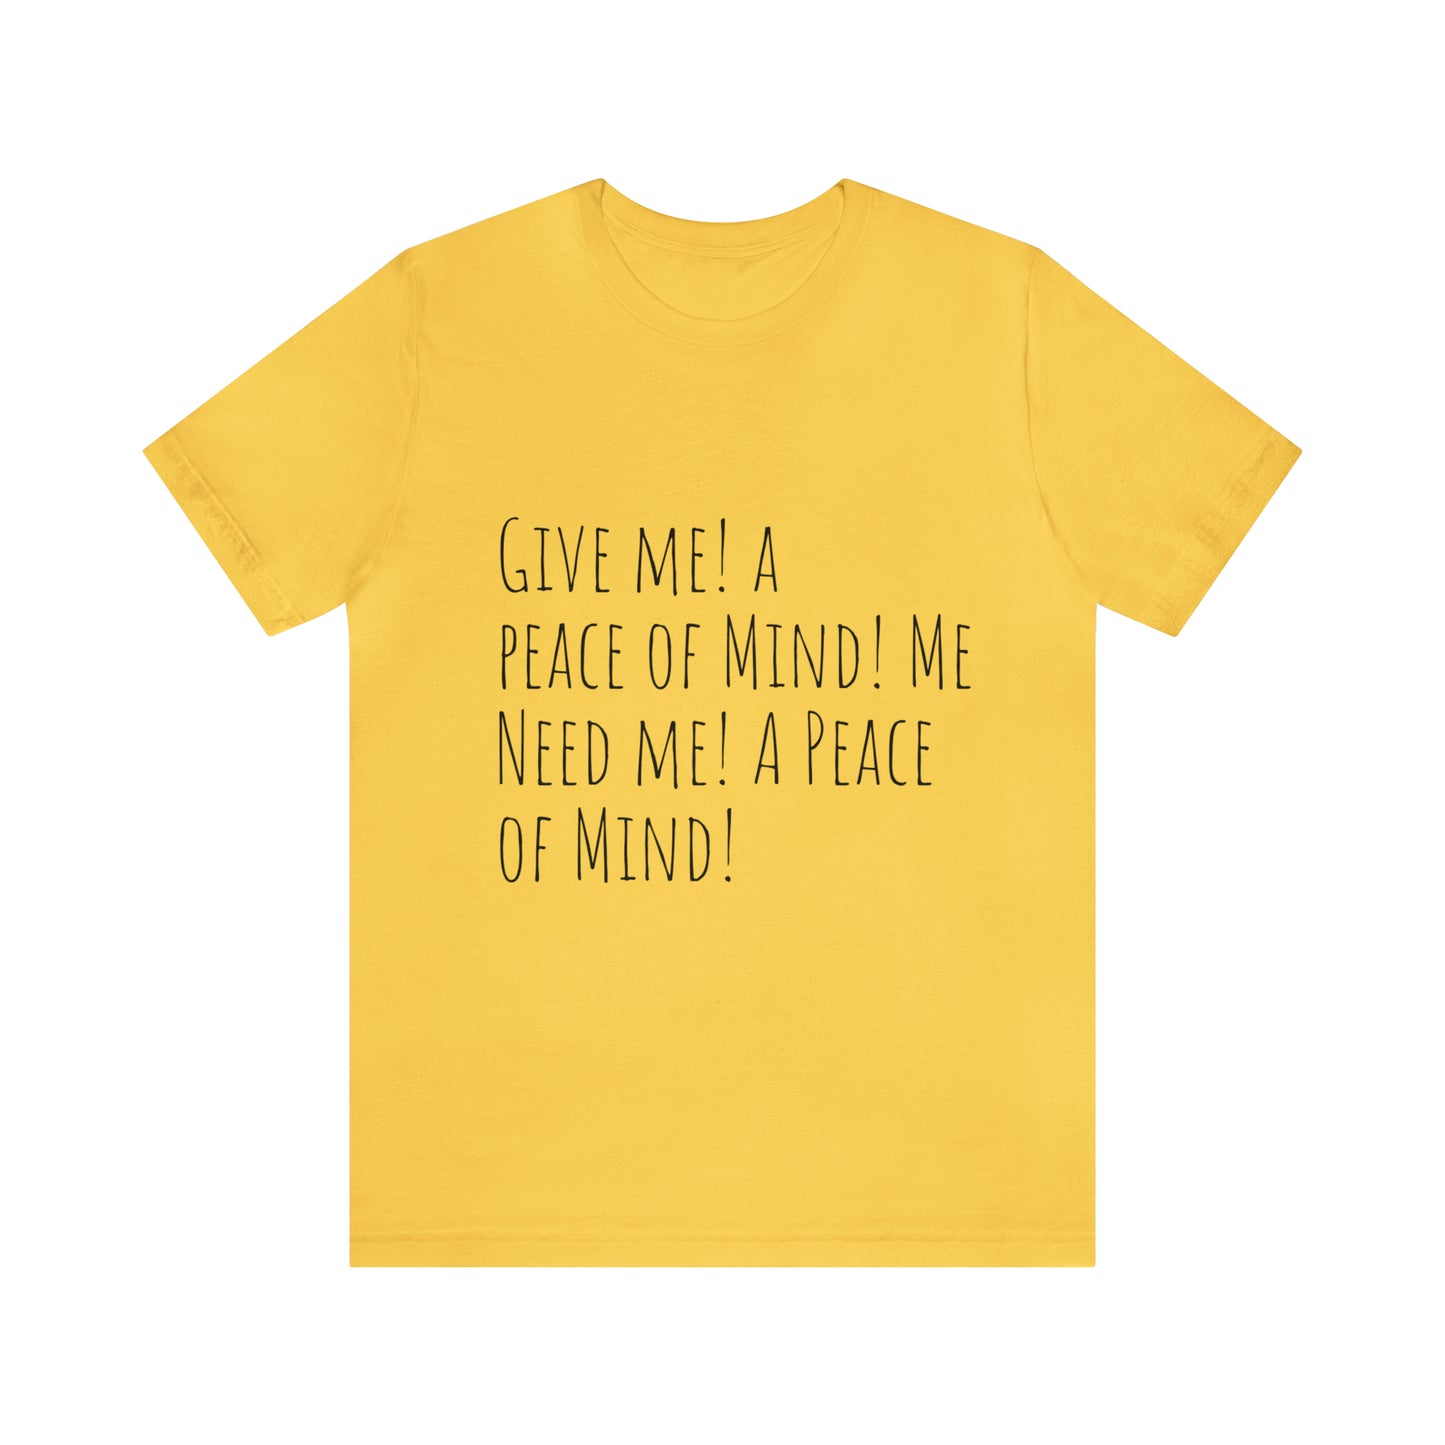 Unisex Jersey Short Sleeve Tee (LionEl's Peace of Mind)